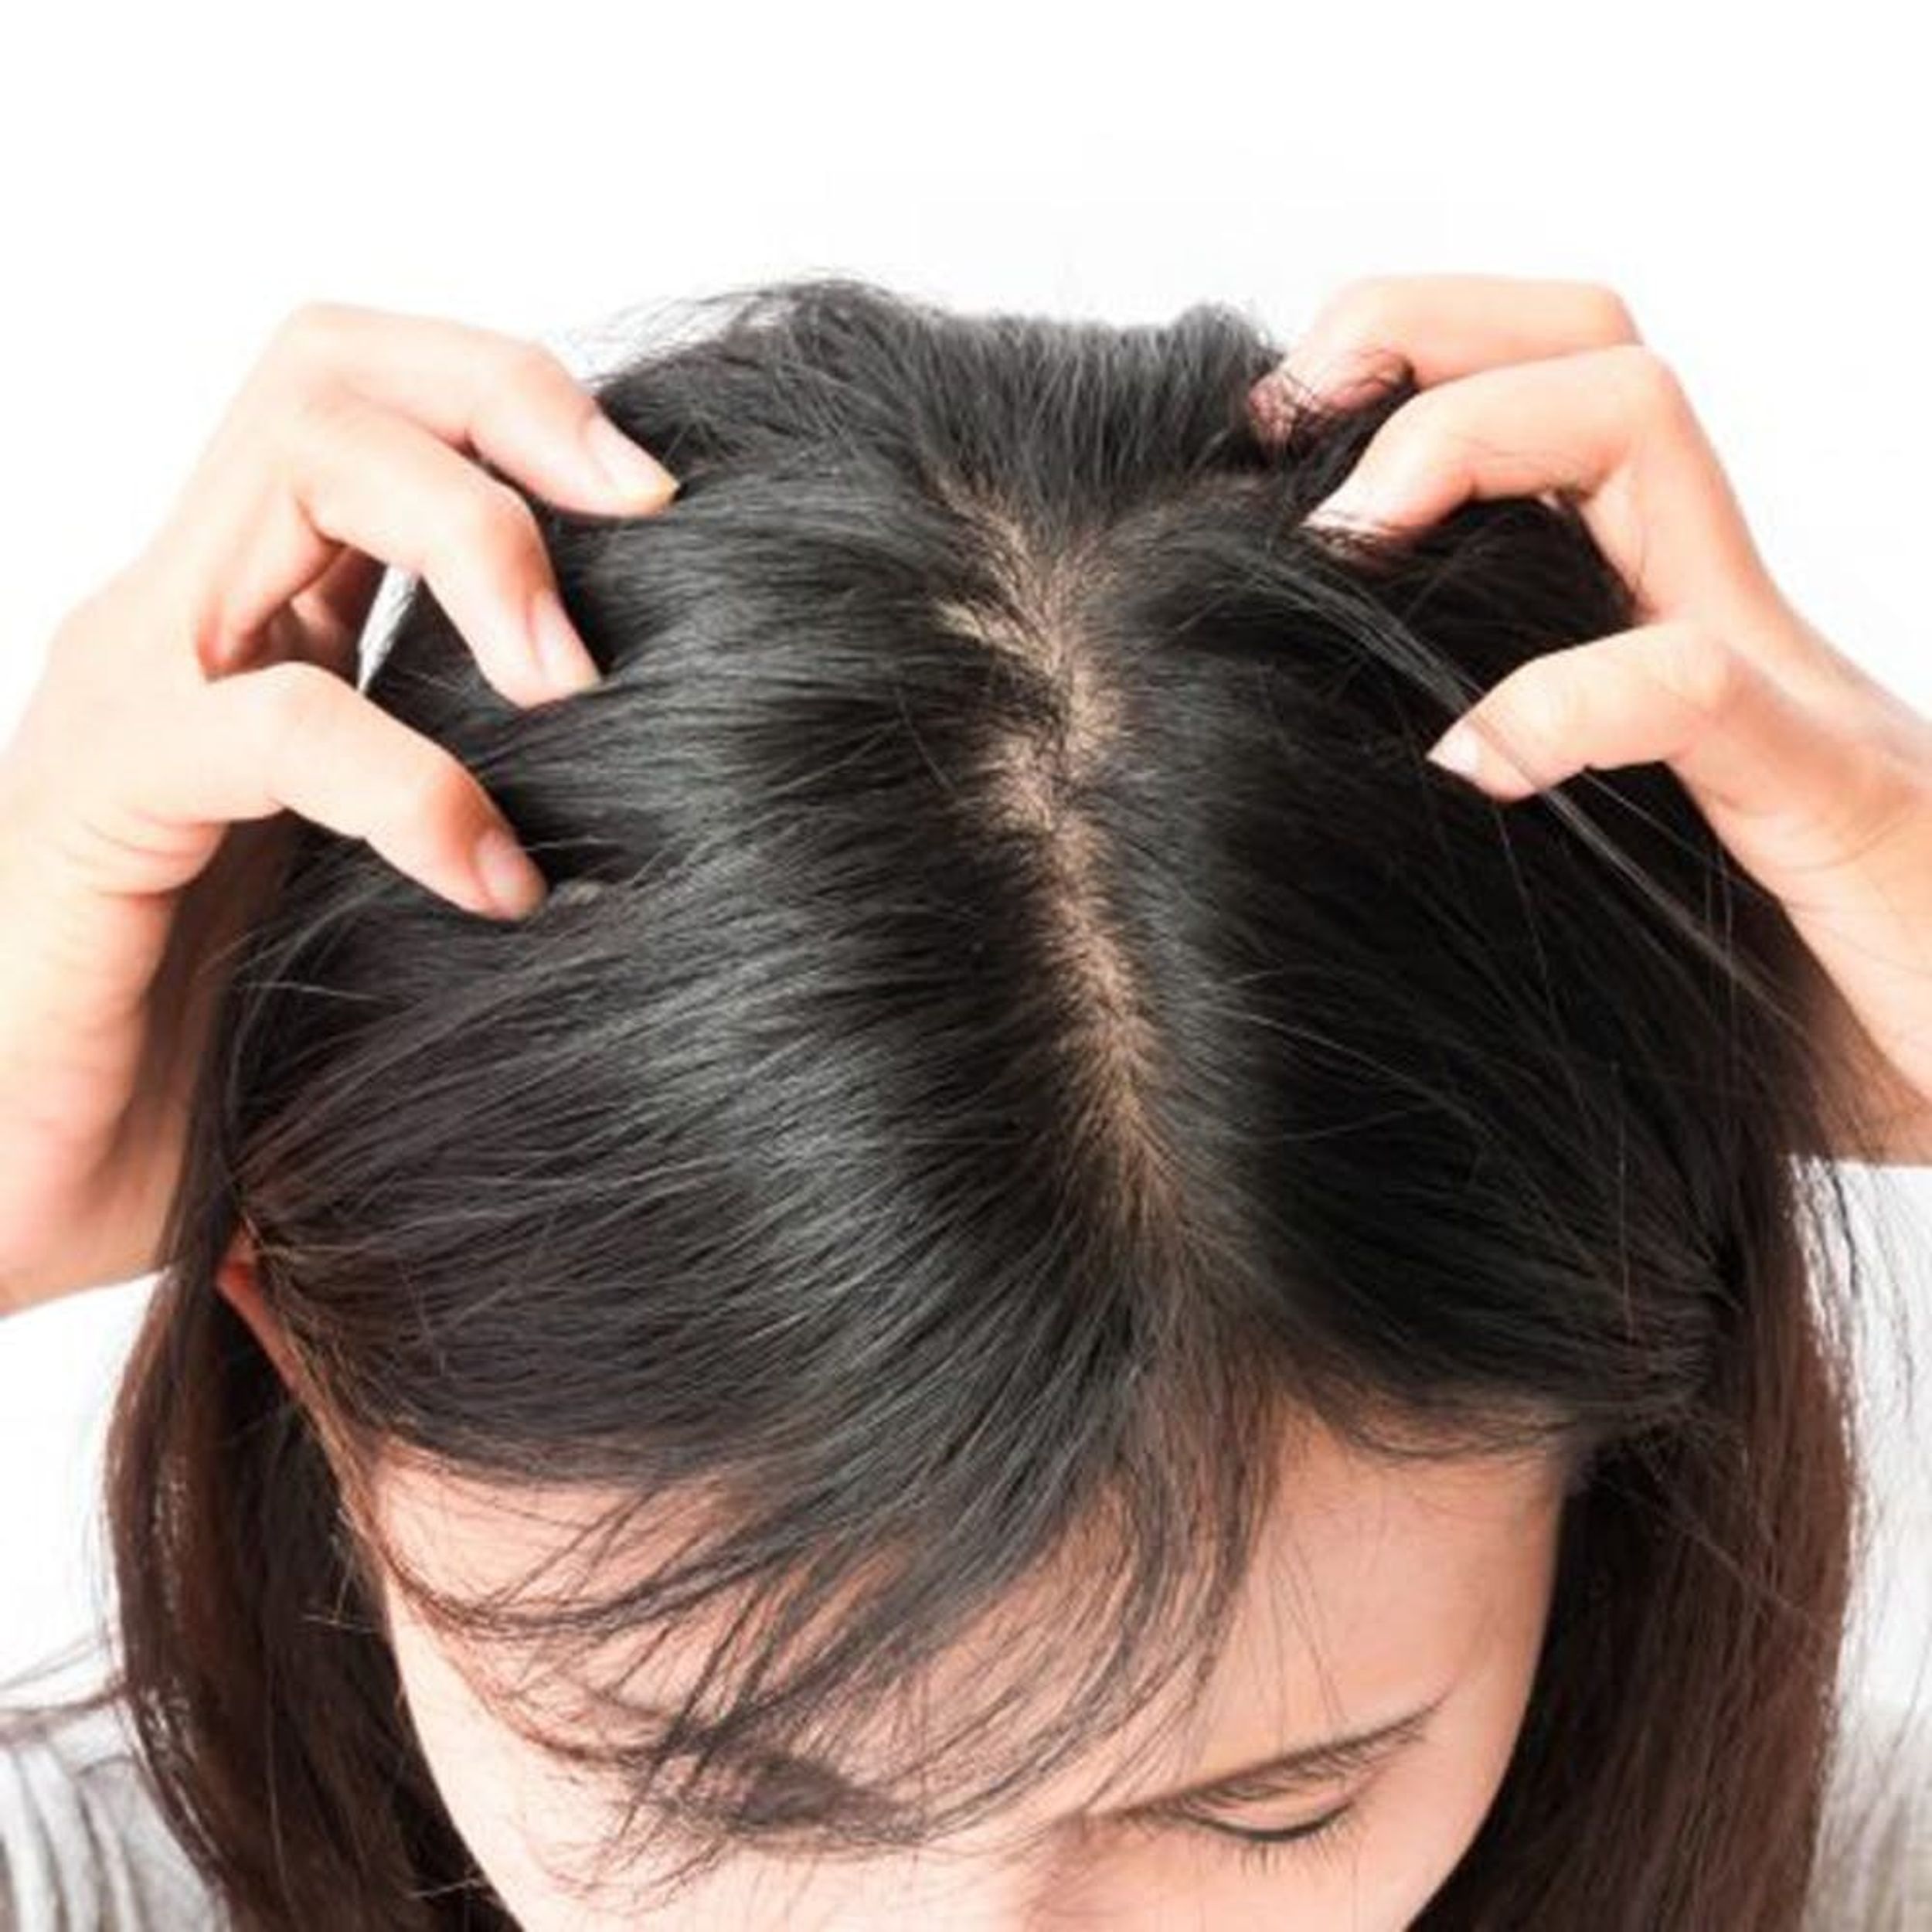 How to Treat Scalp Zits, According to Experts